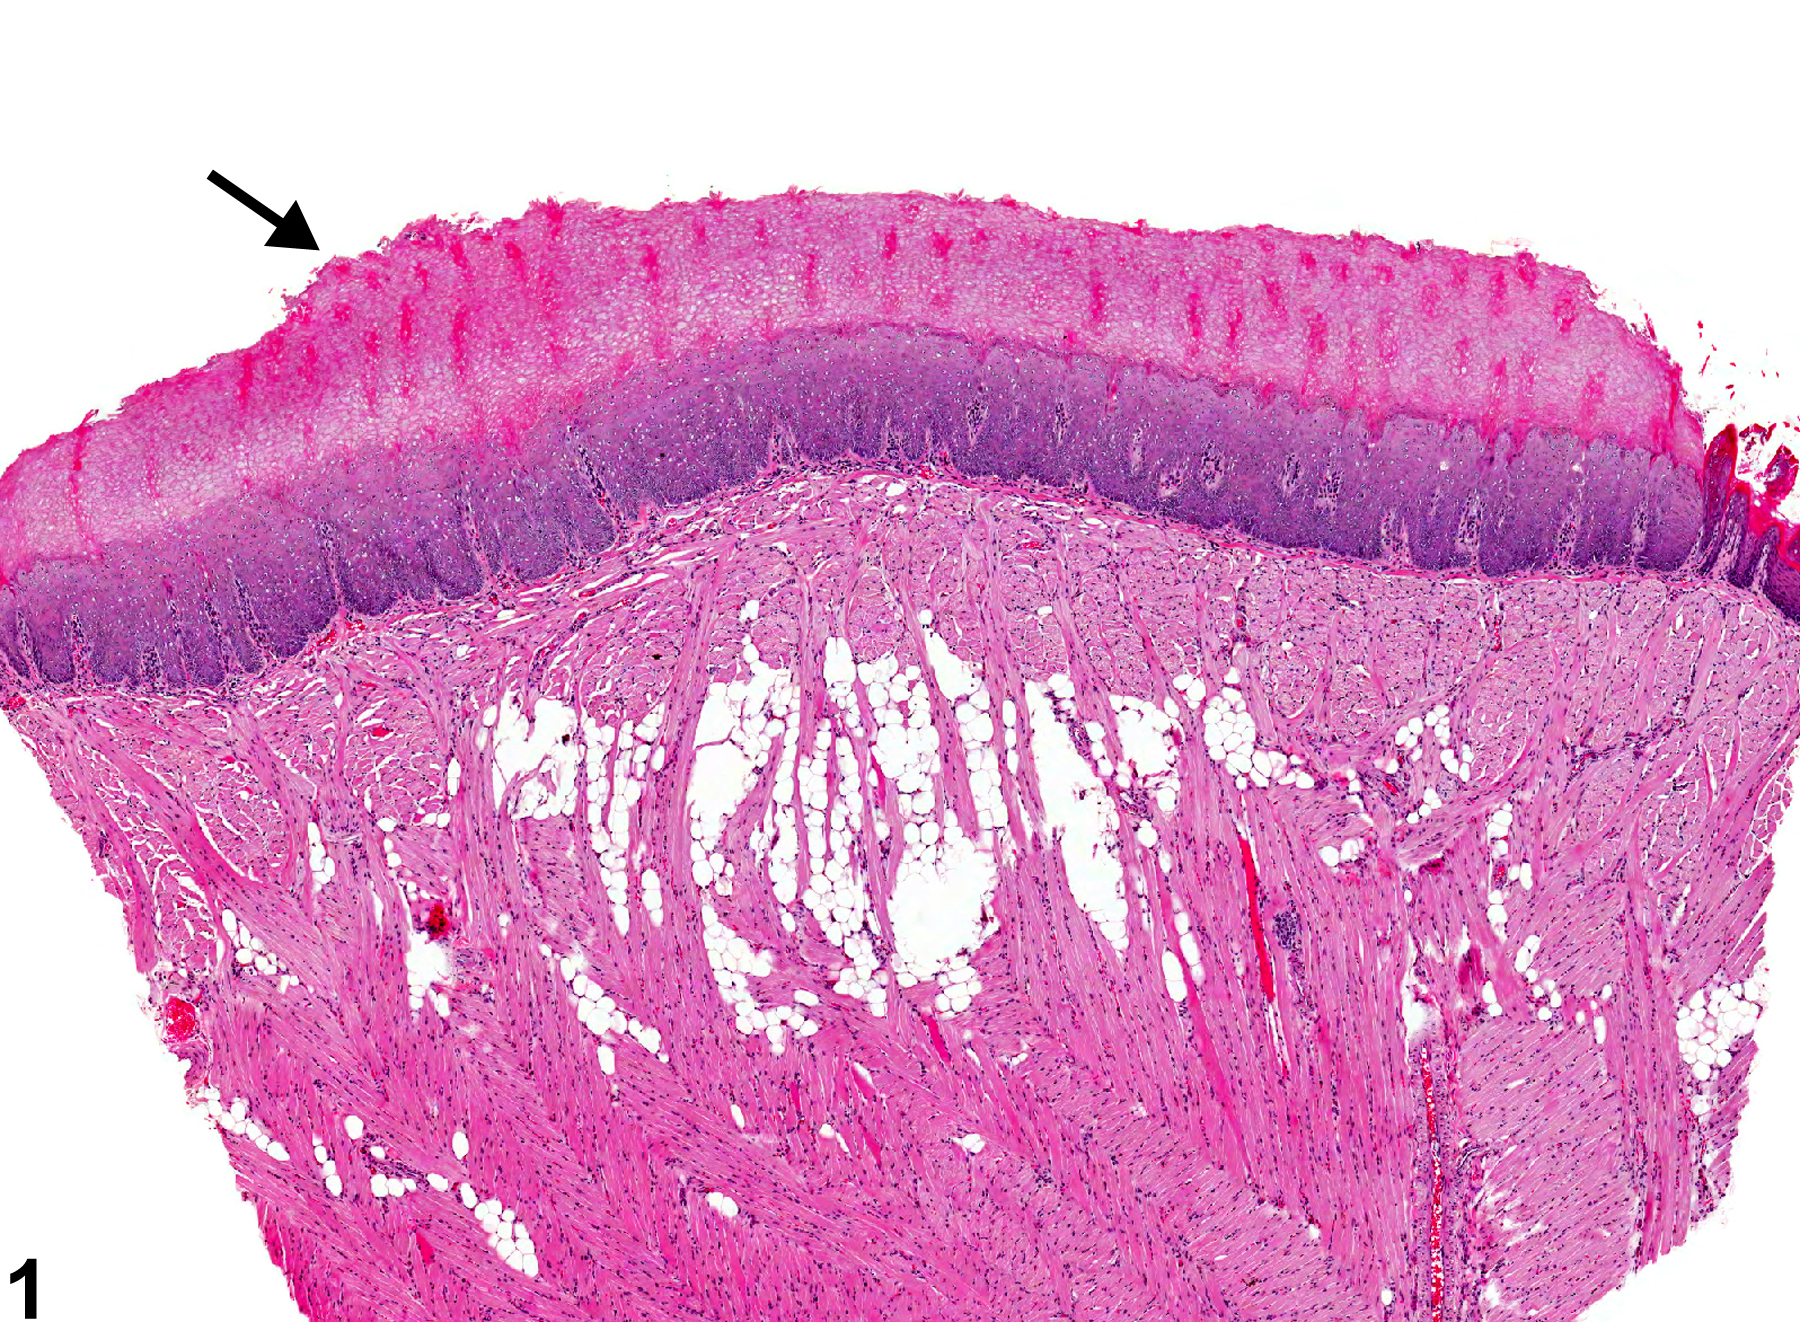 Image of hyperkeratosis in the tongue from a female F344/N rat in a chronic study